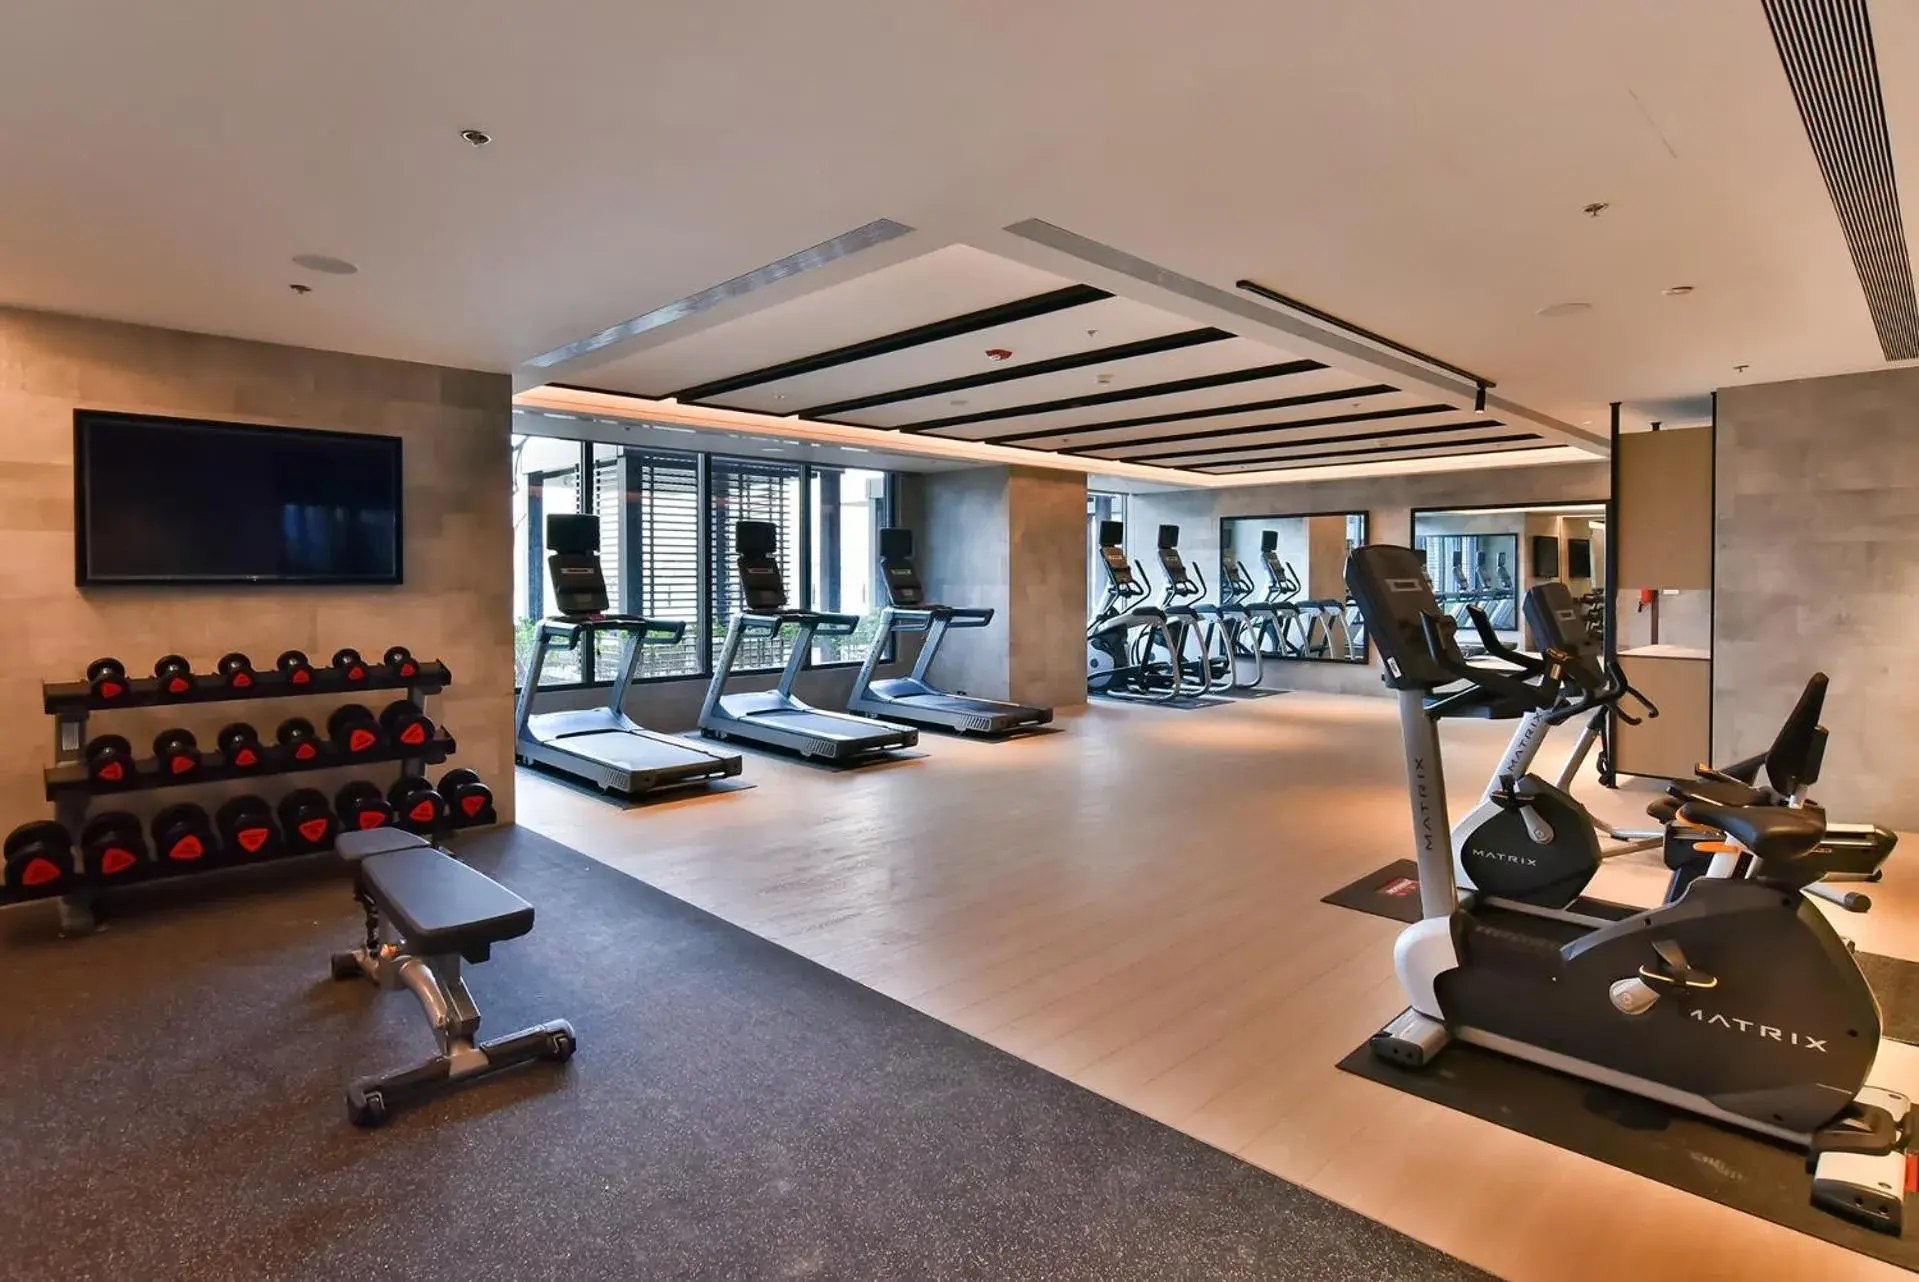 Fitness centre/facilities, Fitness Center/Facilities in Four Points by Sheraton Taipei Bali